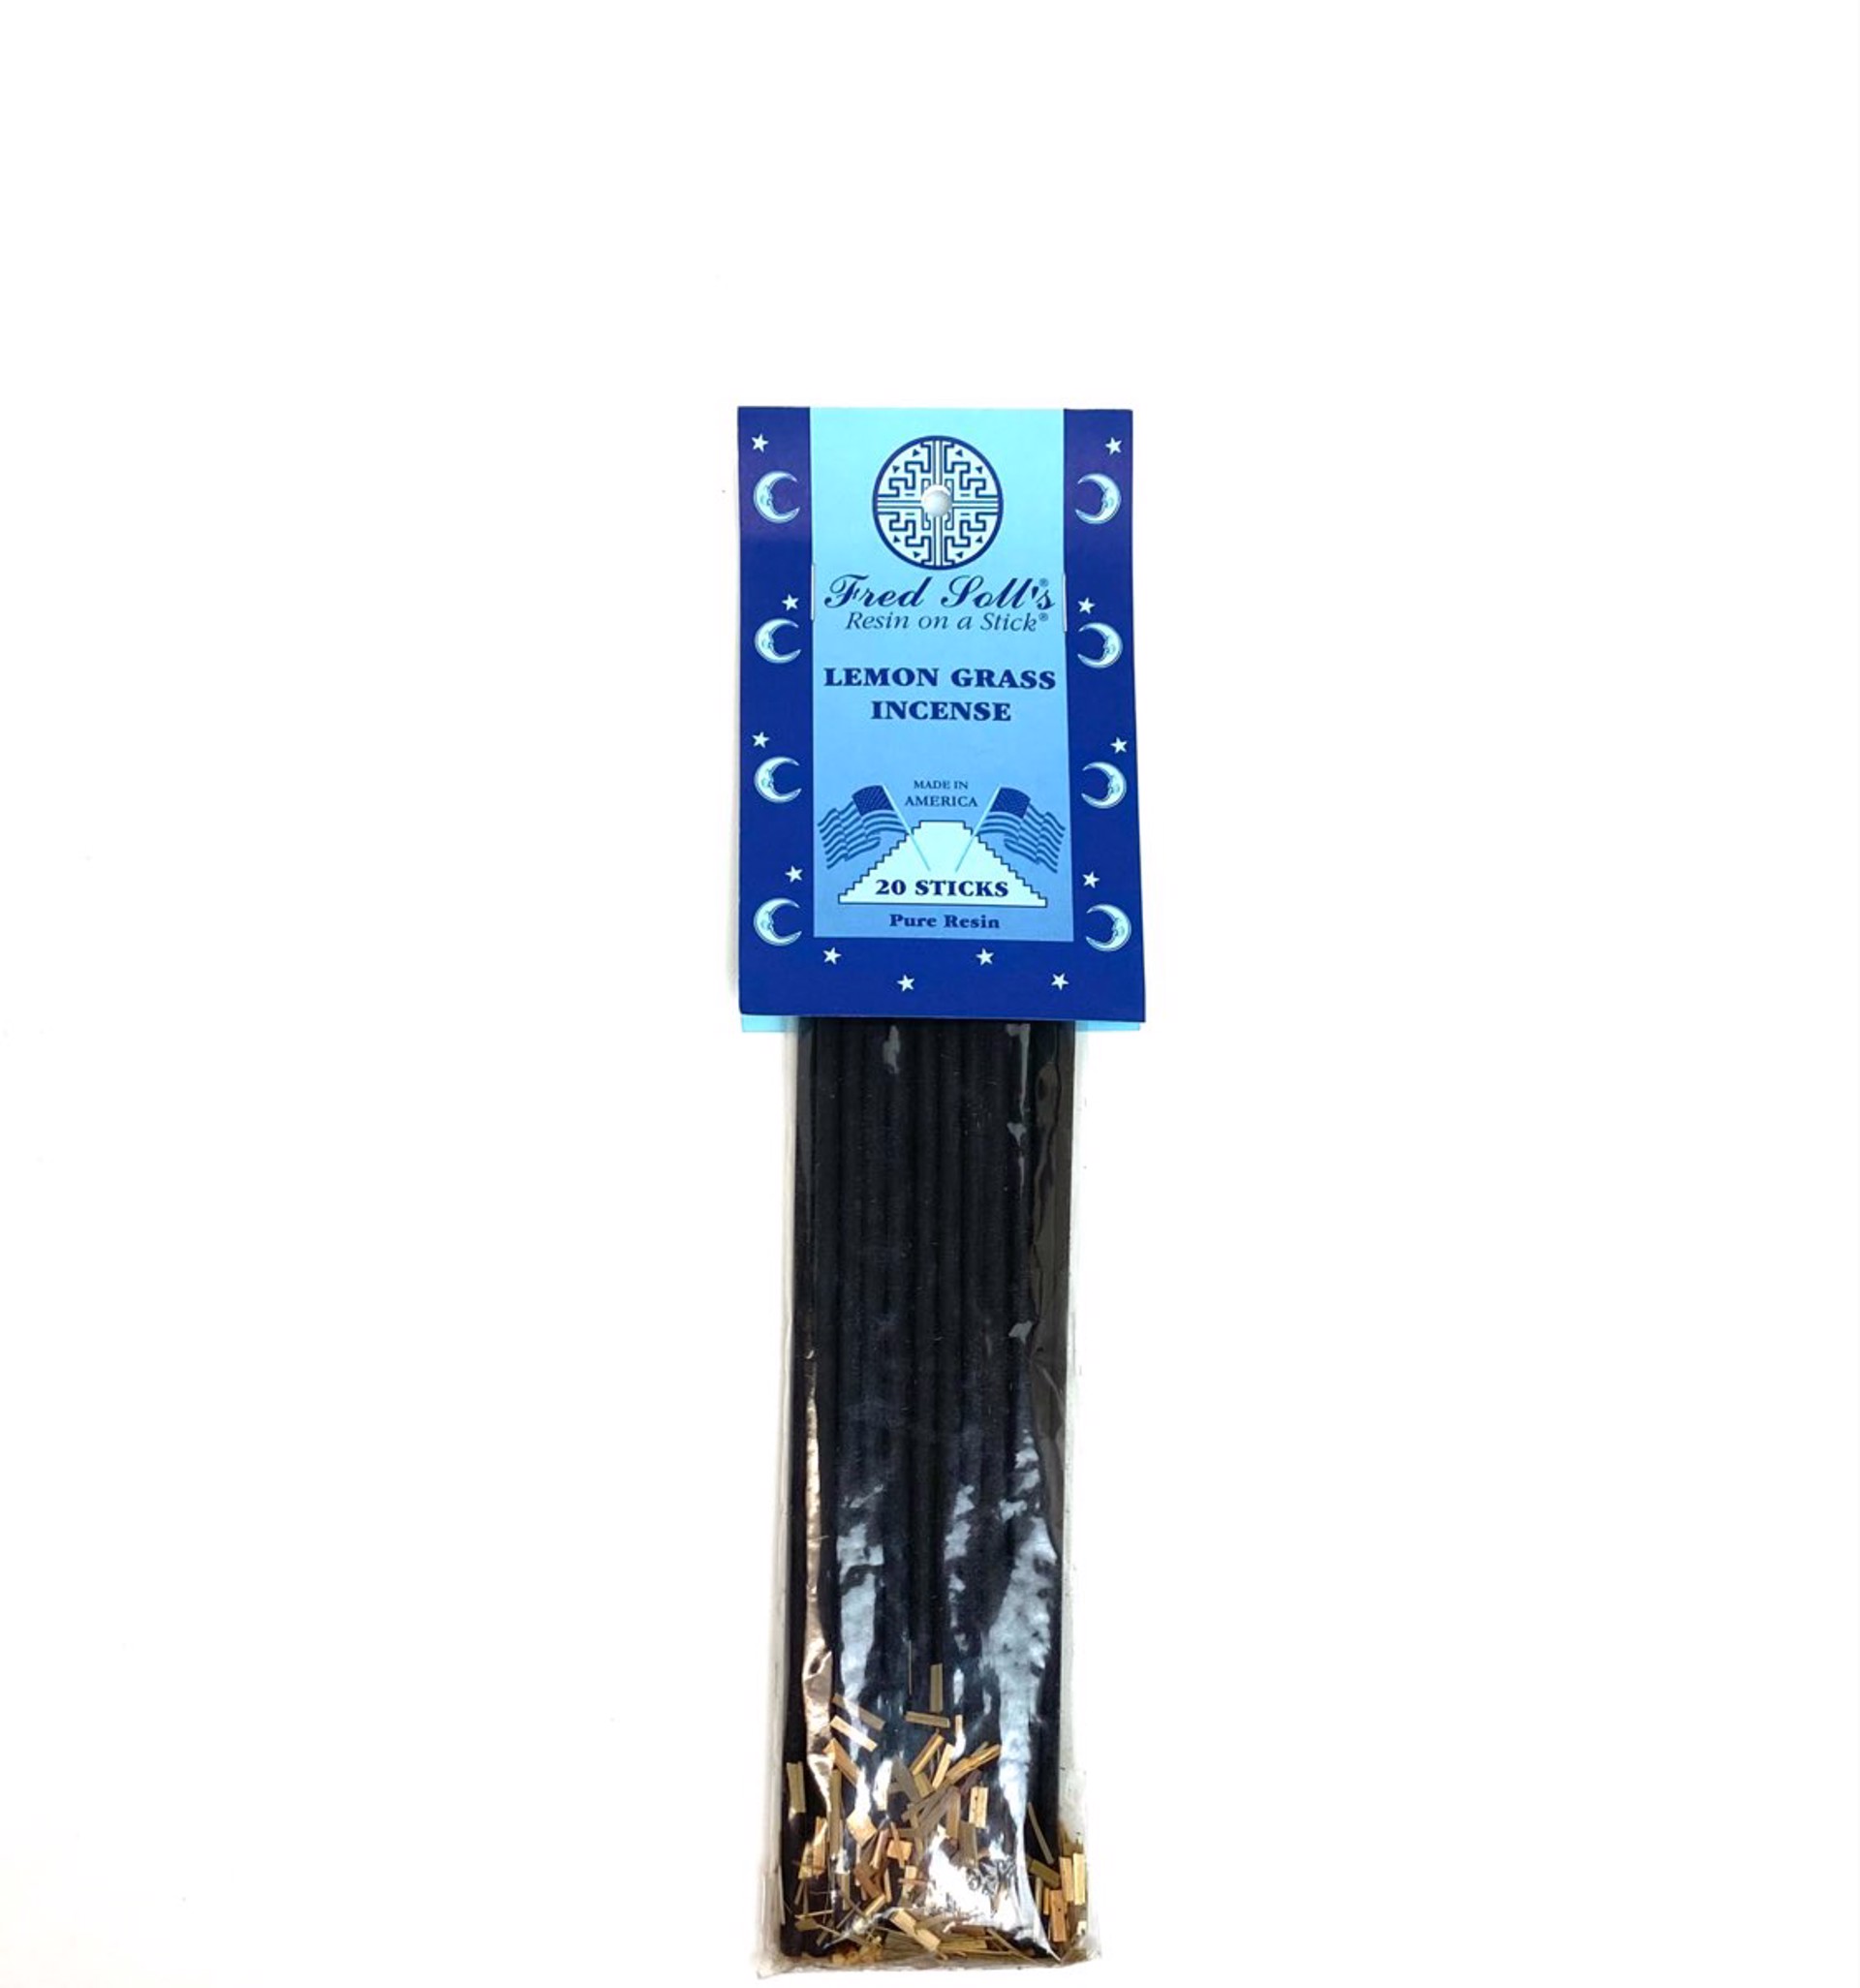 Lemon Grass Incense by Fred Soll Incense